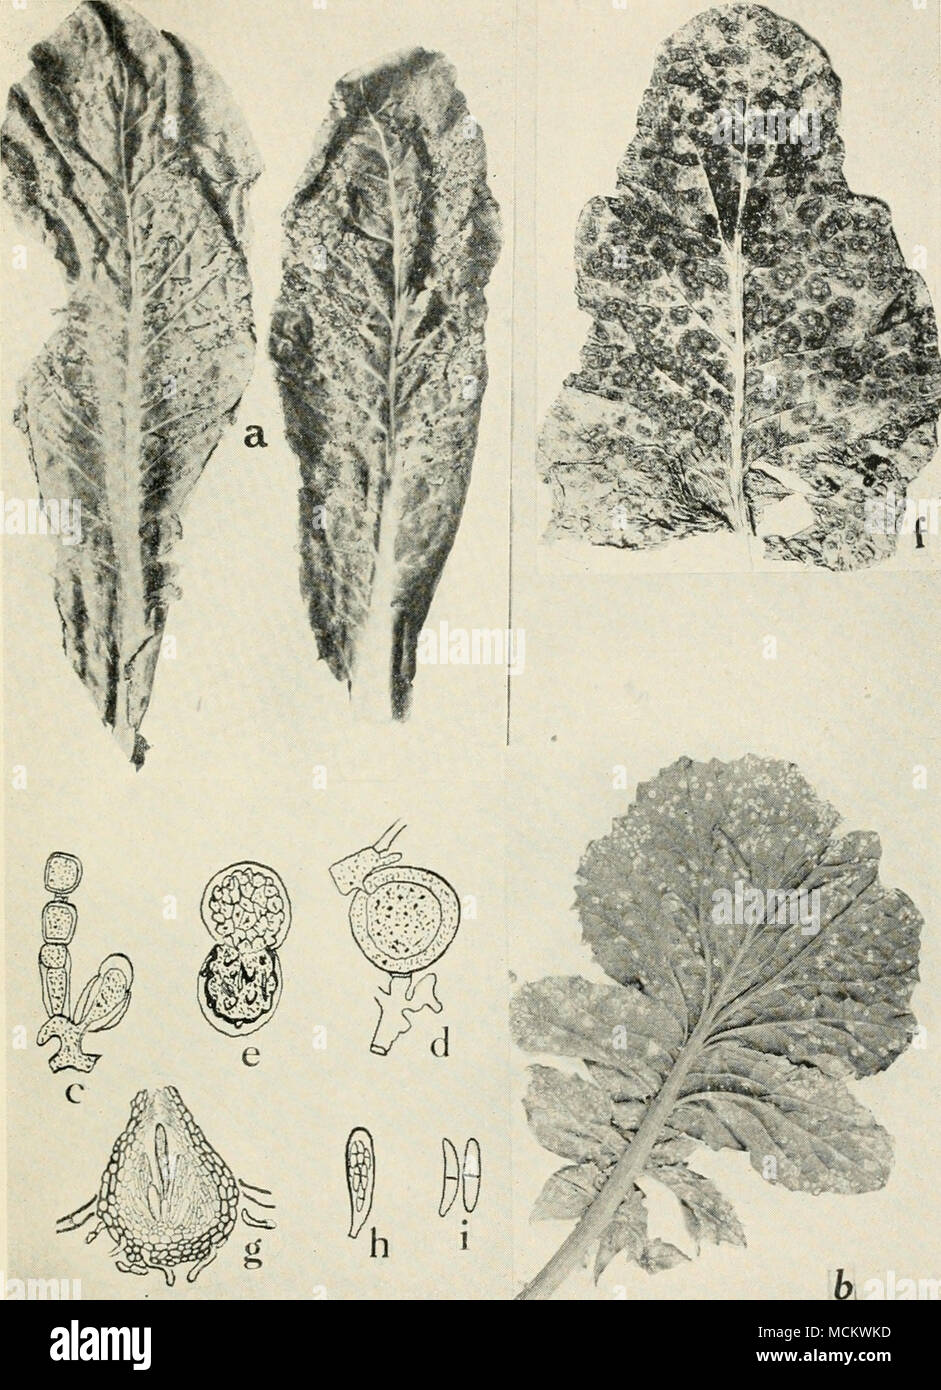 . Fig. 33. Diseases of the Cauliflower and Radish. a. Spot disease of cauliflower (after McCuUoch), b. white rust of radish, c. conidio- phore of the white rust fungus, Cystopus candidus, d. fertilization in Albugo Candida, e. germination of the oospore of Albugo Candida, f. ring spot on cauliflower head. g. perithecium of Mycosphcerella brassicicola, h. ascus of MycosphcrrcUa brassicicola, i. ascospores of Mycosphmrella brassicicola (g. to i. after Osmun and Anderson). Stock Photo